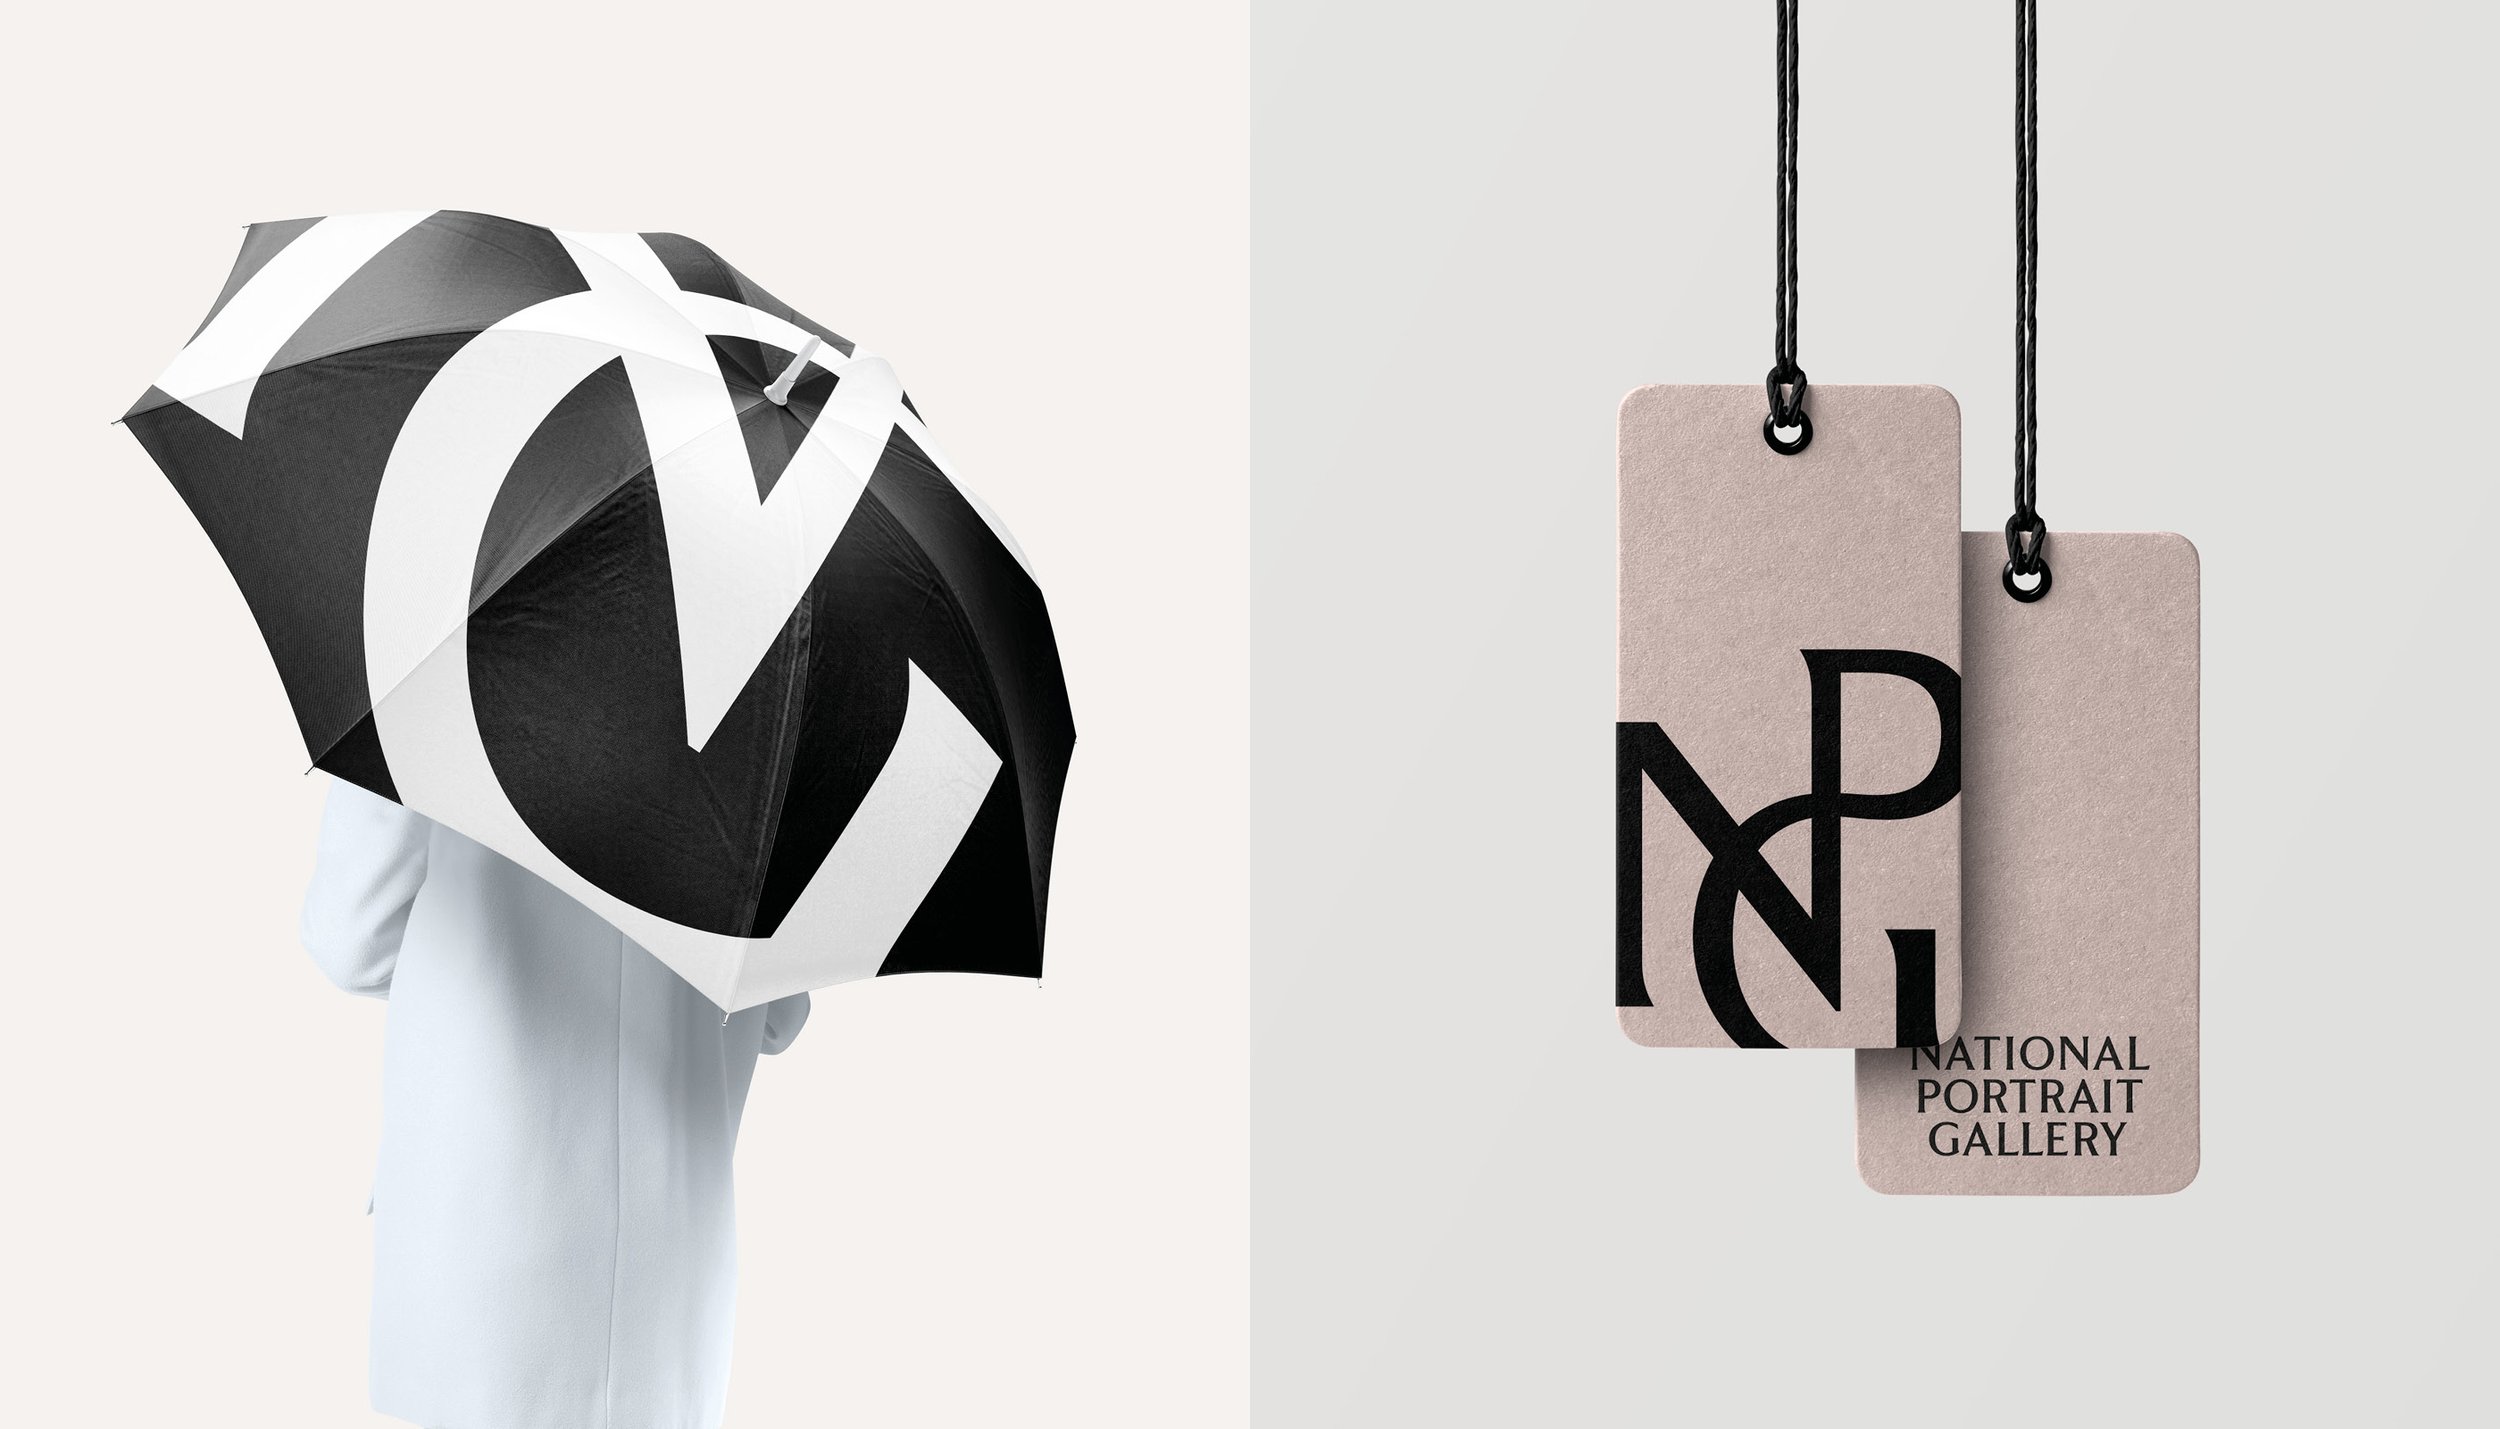 New monogram, custom typeface and brand identity designed by Edit Brand Studio for London's National Portrait Gallery